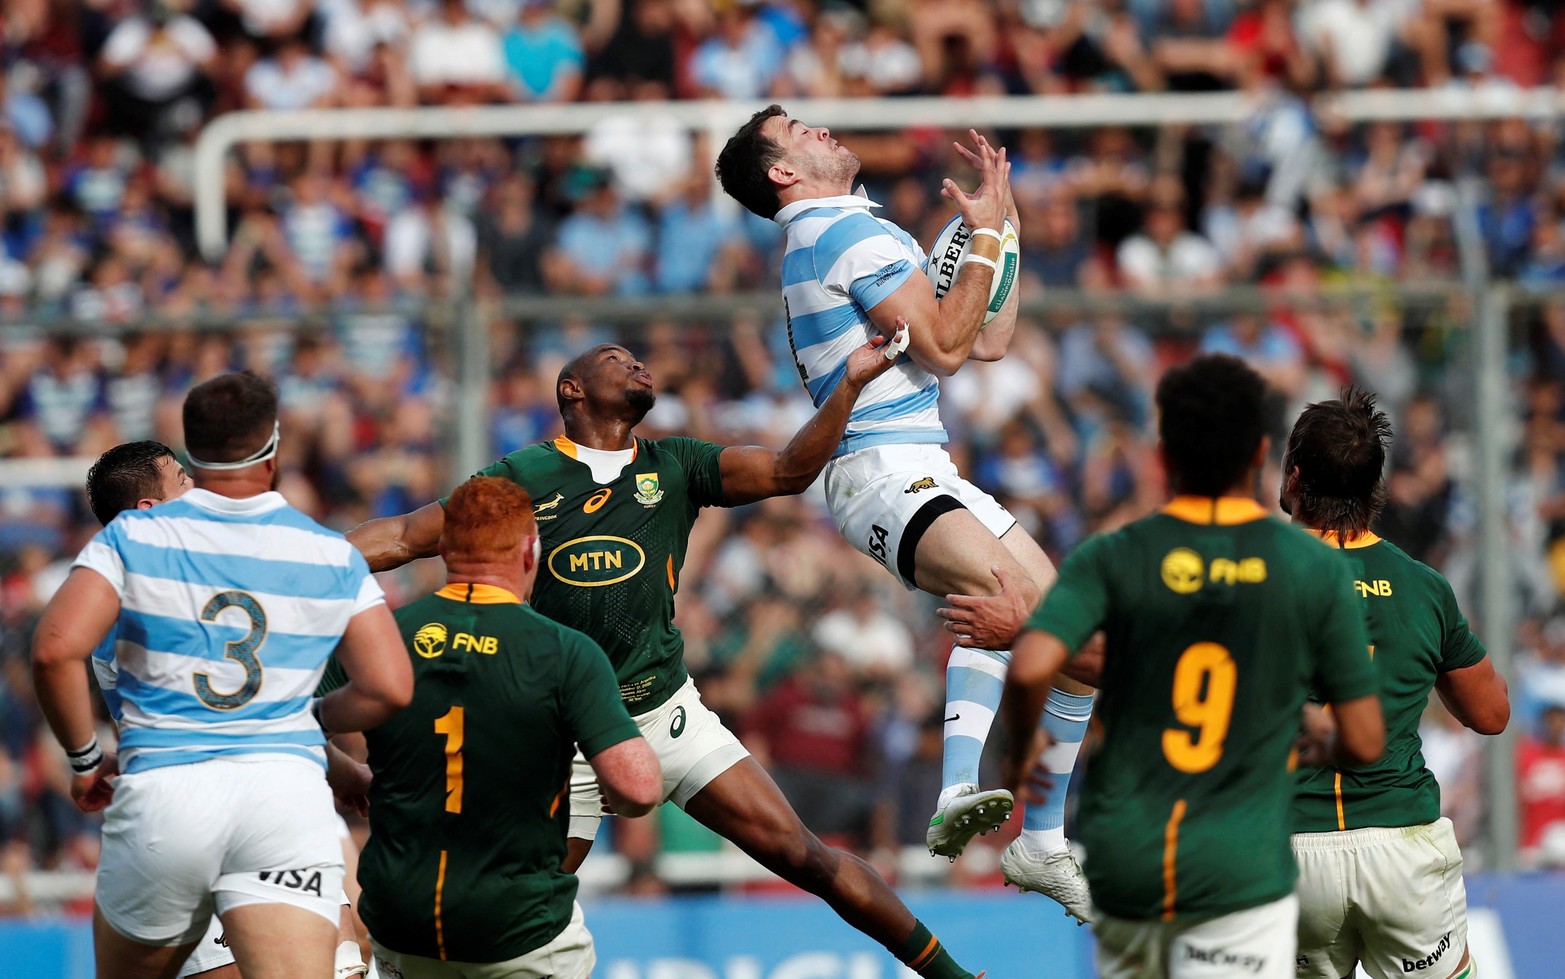 Emiliano Boffelli toma la pelota en el aire. Rugby Championship. Argentina vs. South Africa. Reuters/Agustin Marcarian